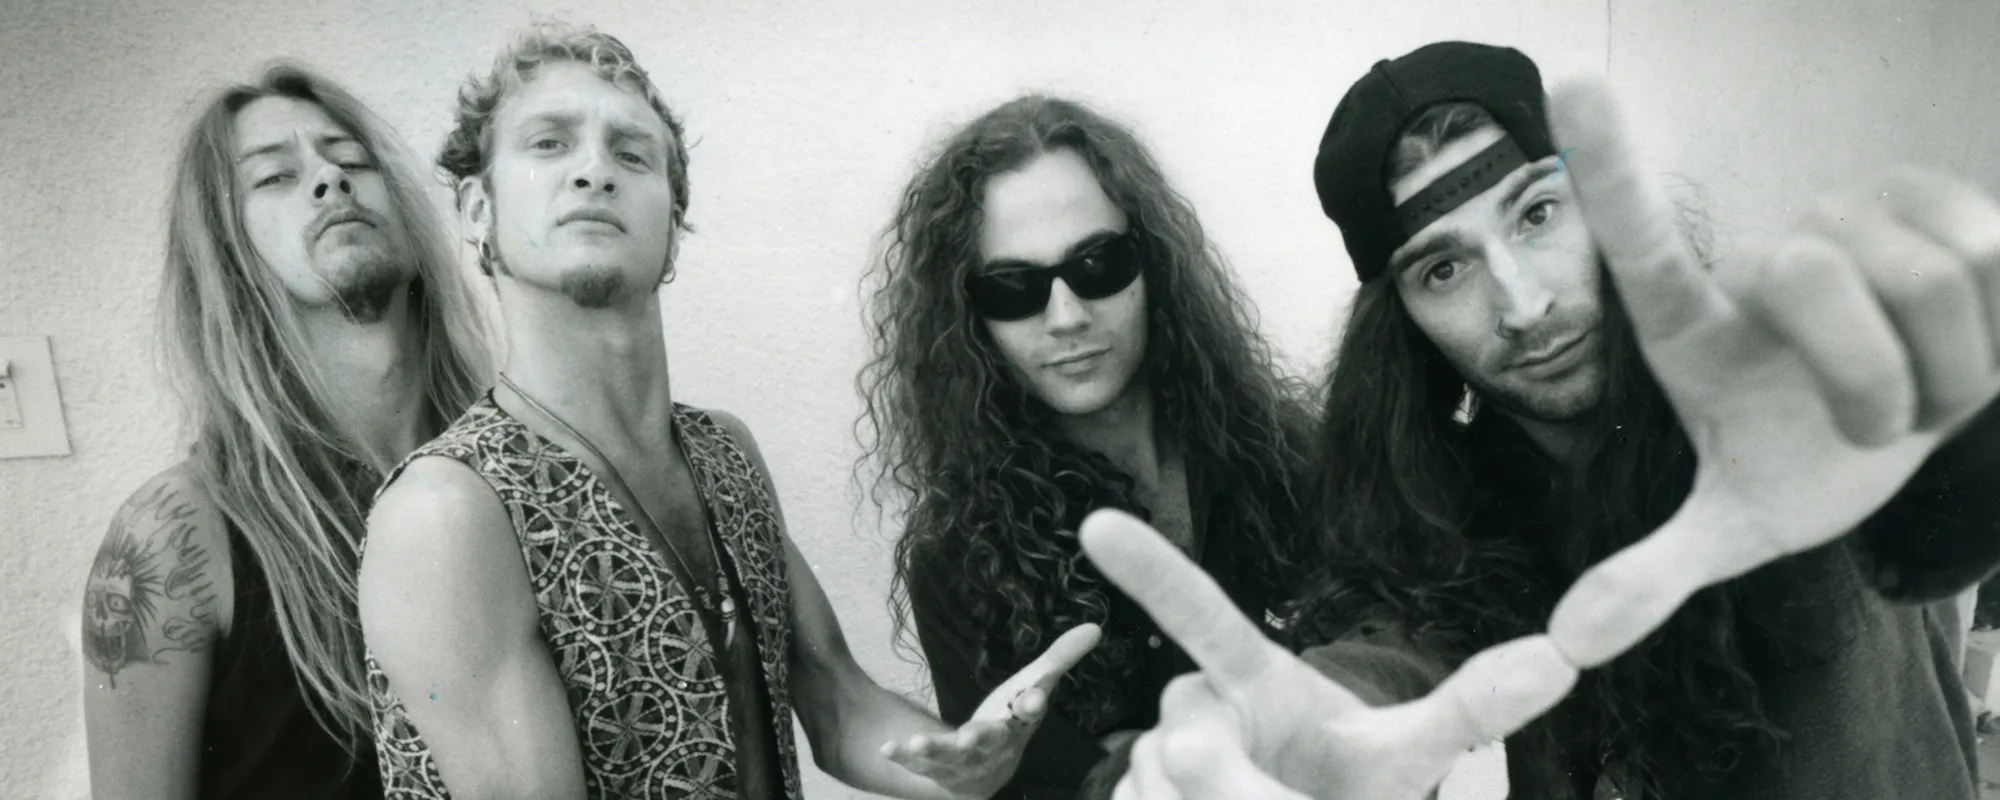 Behind the Bone-Rattling Band Name “Alice in Chains”